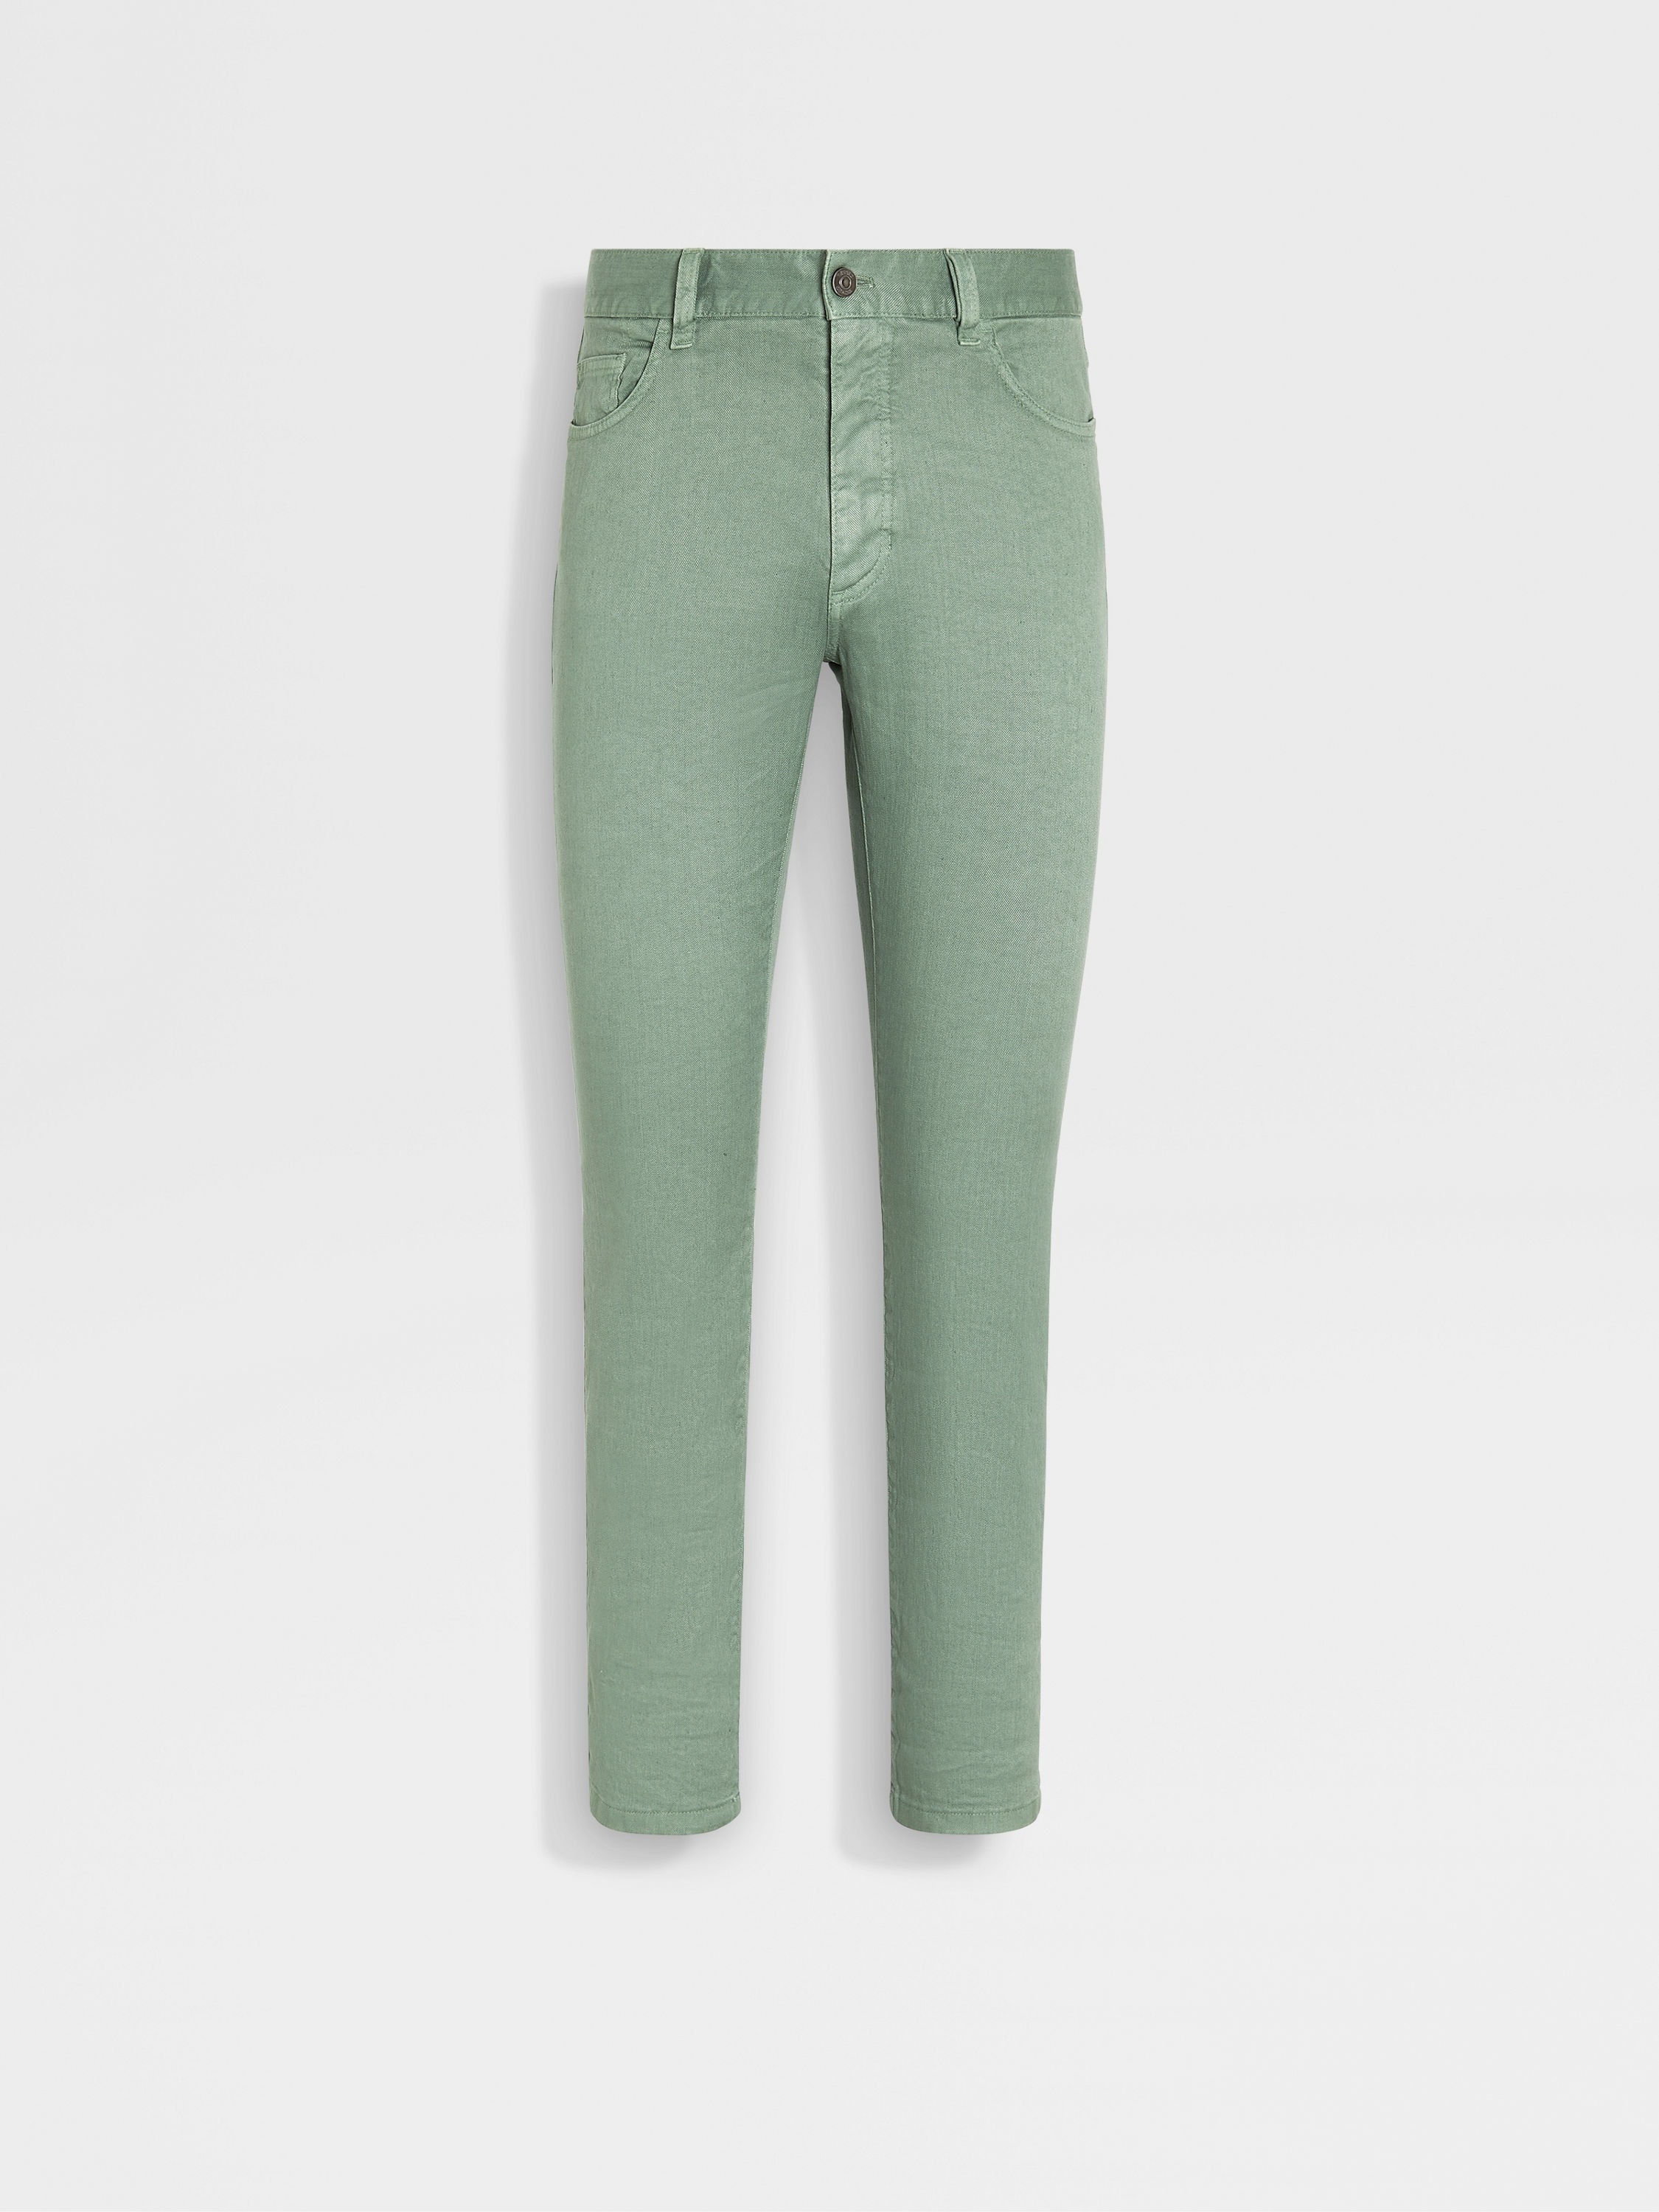 SAGE GREEN STRETCH LINEN AND COTTON ROCCIA JEANS - 1